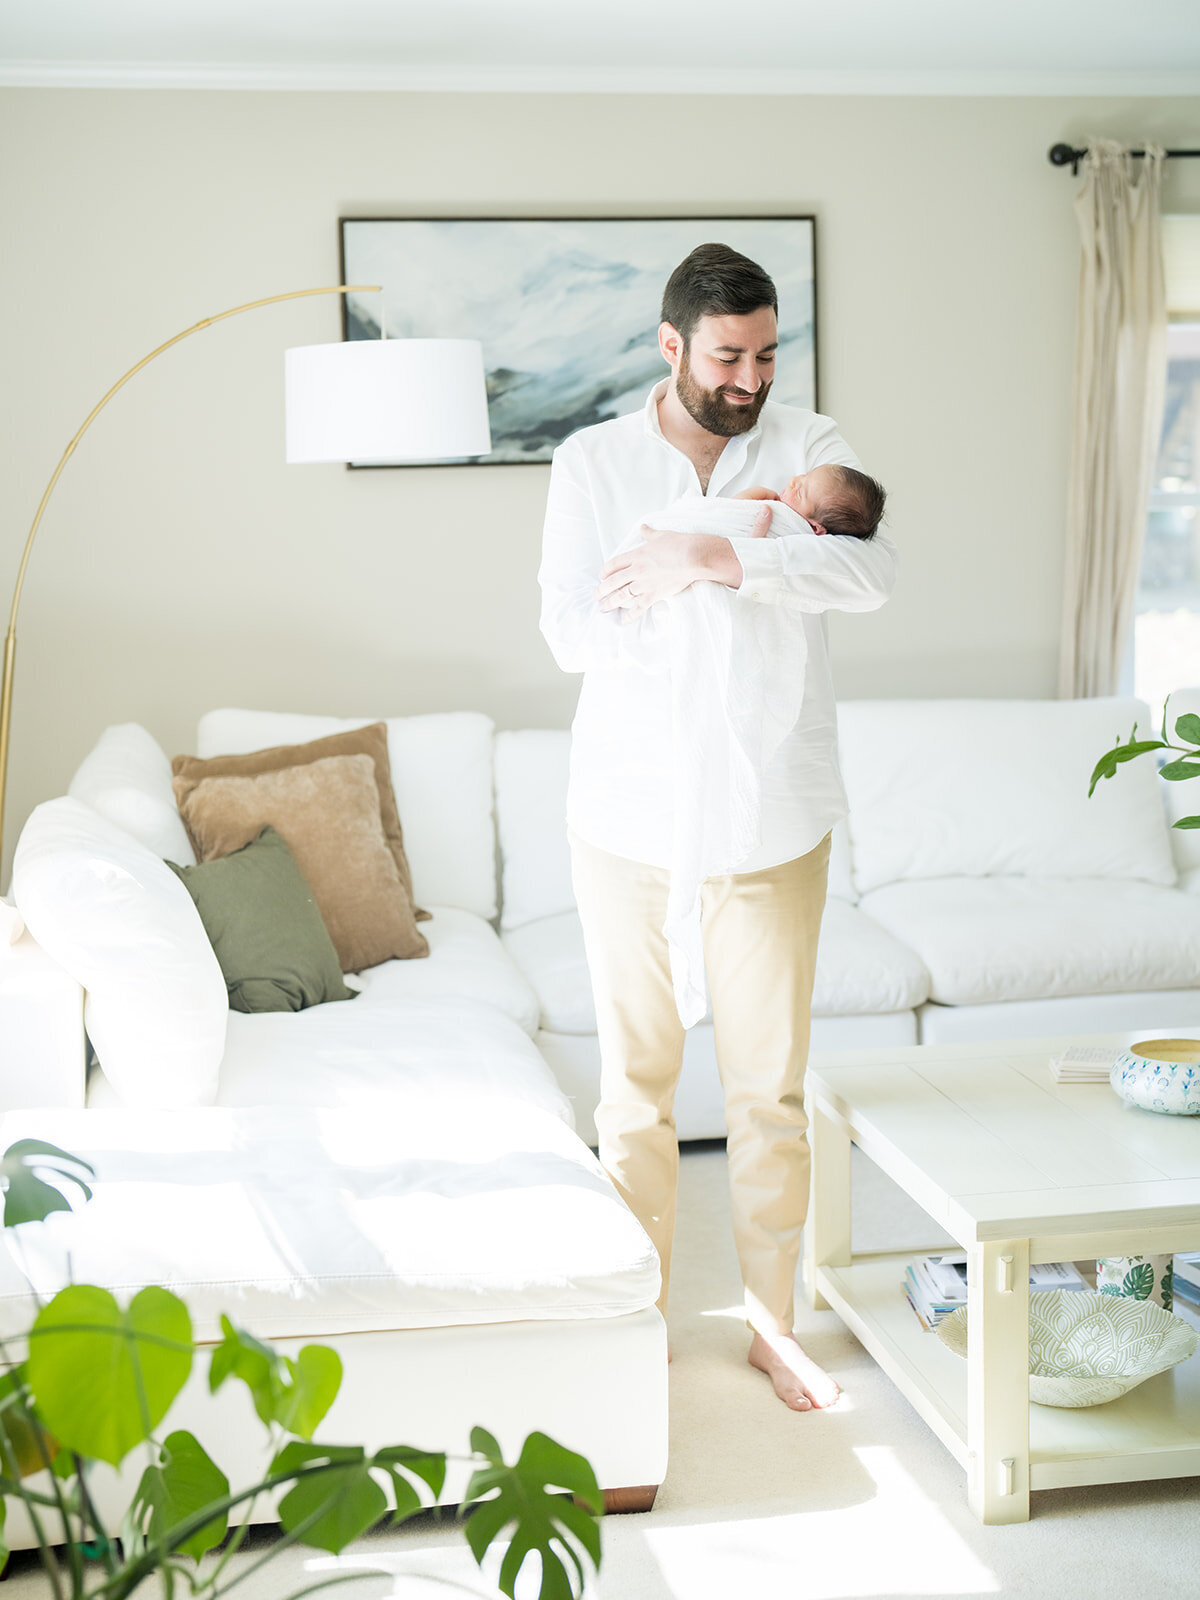 Brown-haired and bearded father stands in his white living room holding his newborn baby.